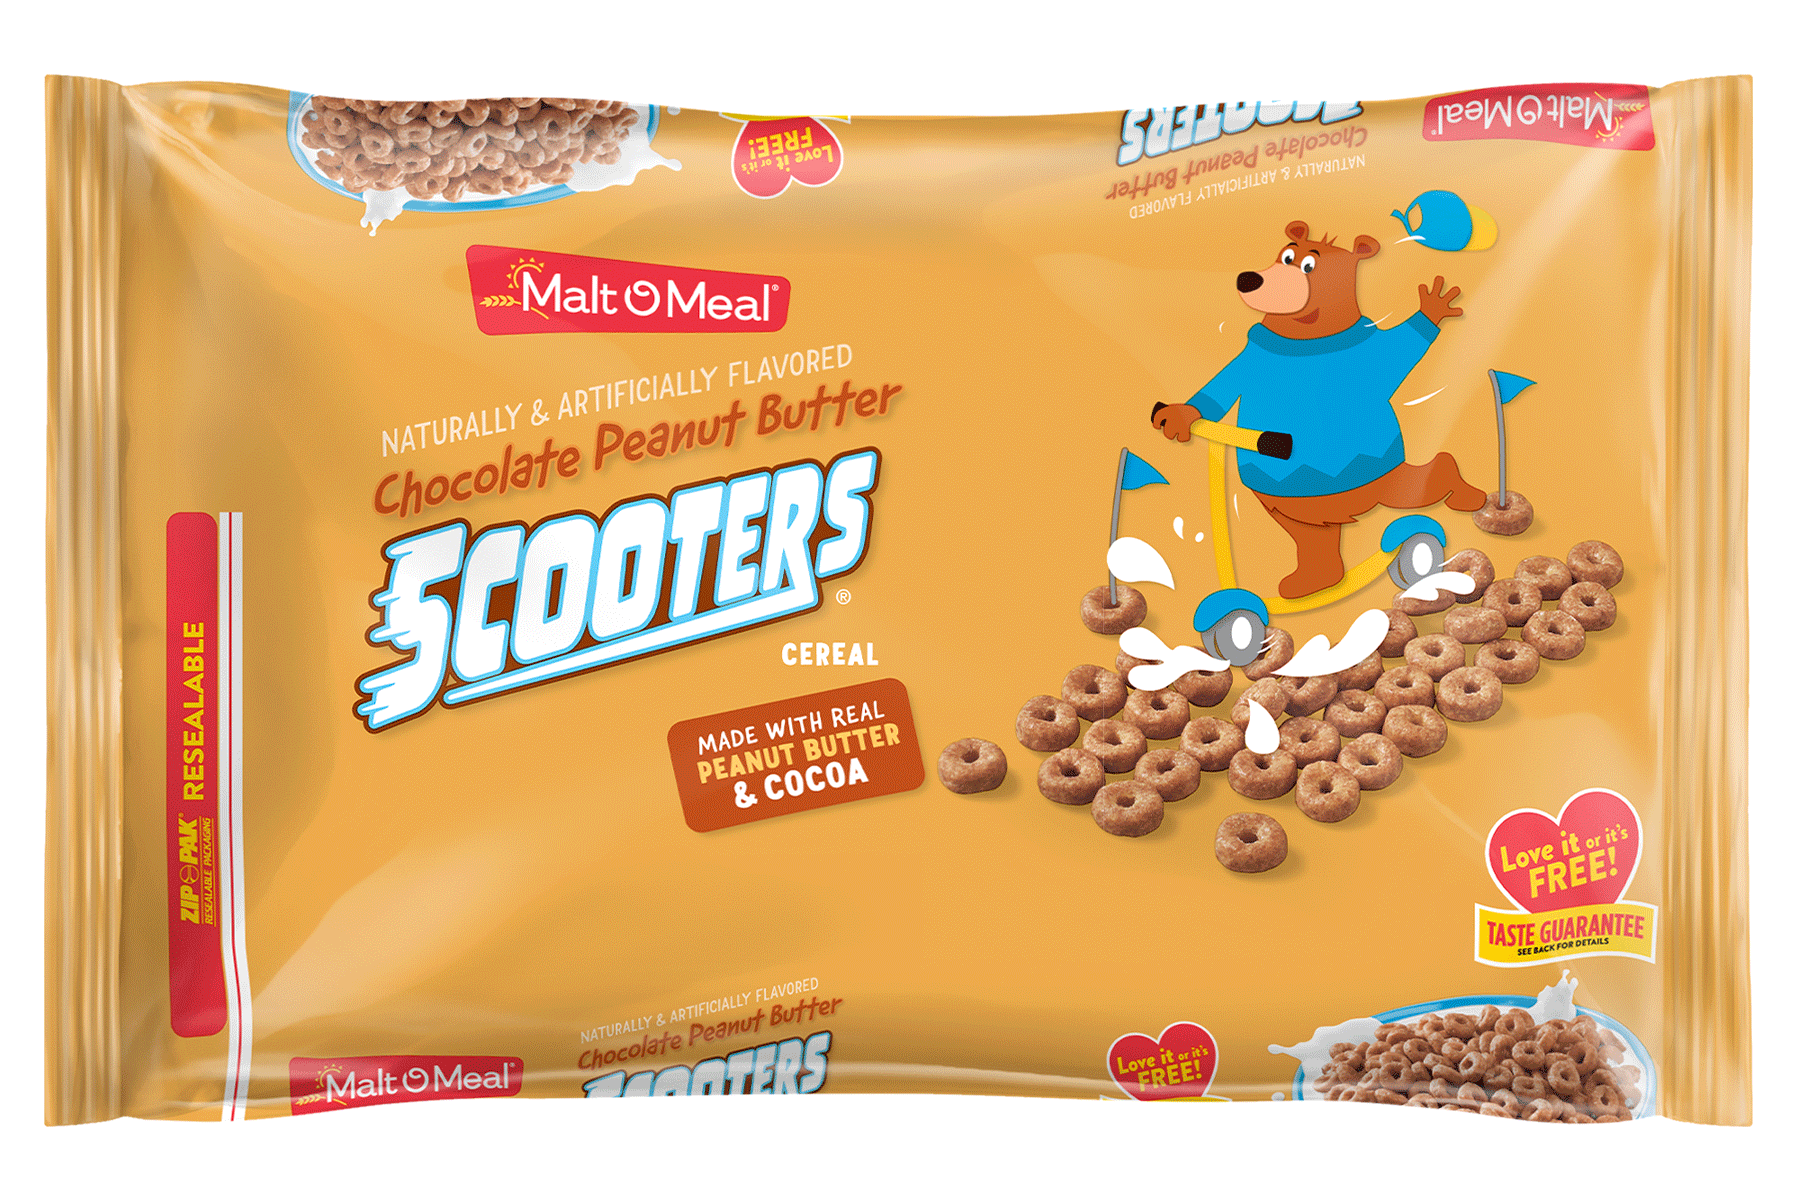 New Malt-O-Meal Chocolate Peanut Butter Scooters cereal